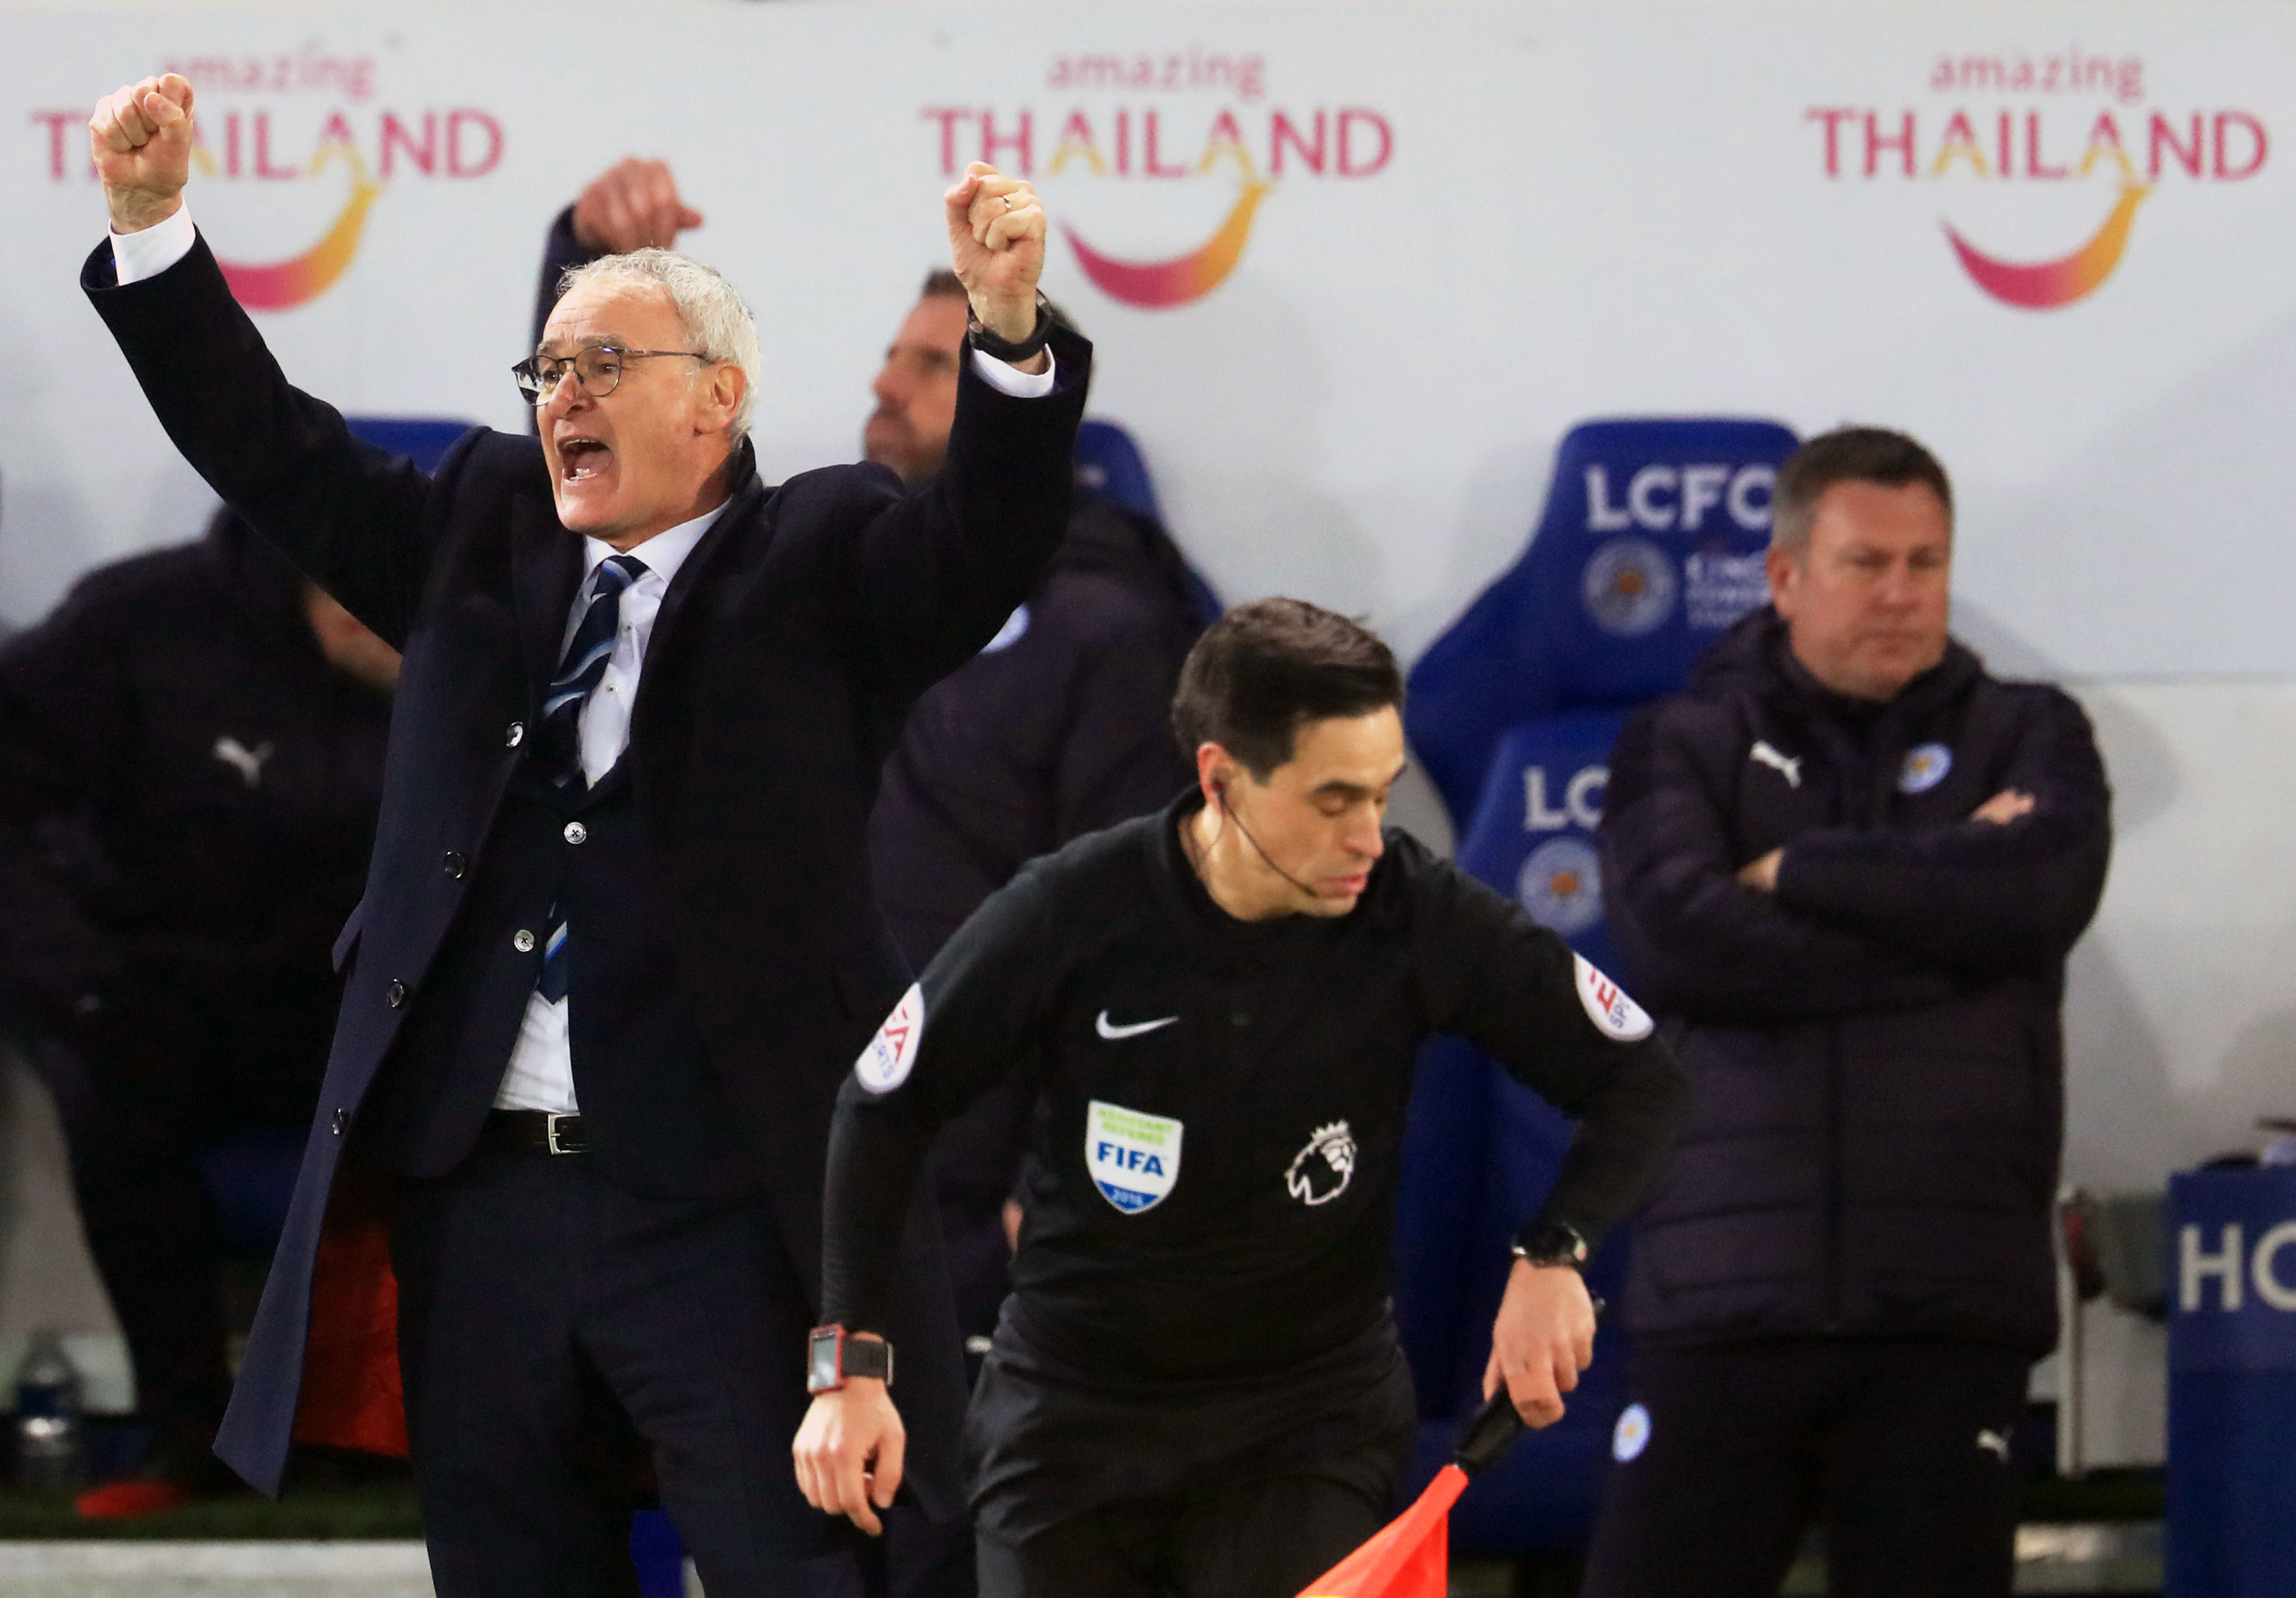 Leicester City manager, Claudio Ranieri, left, celebrates victory at the final whistle of the English Premier League soccer match Leicester City versus West Ham United at the King Power Stadium, Leicester, England, Saturday, Dec. 31, 2016. AP